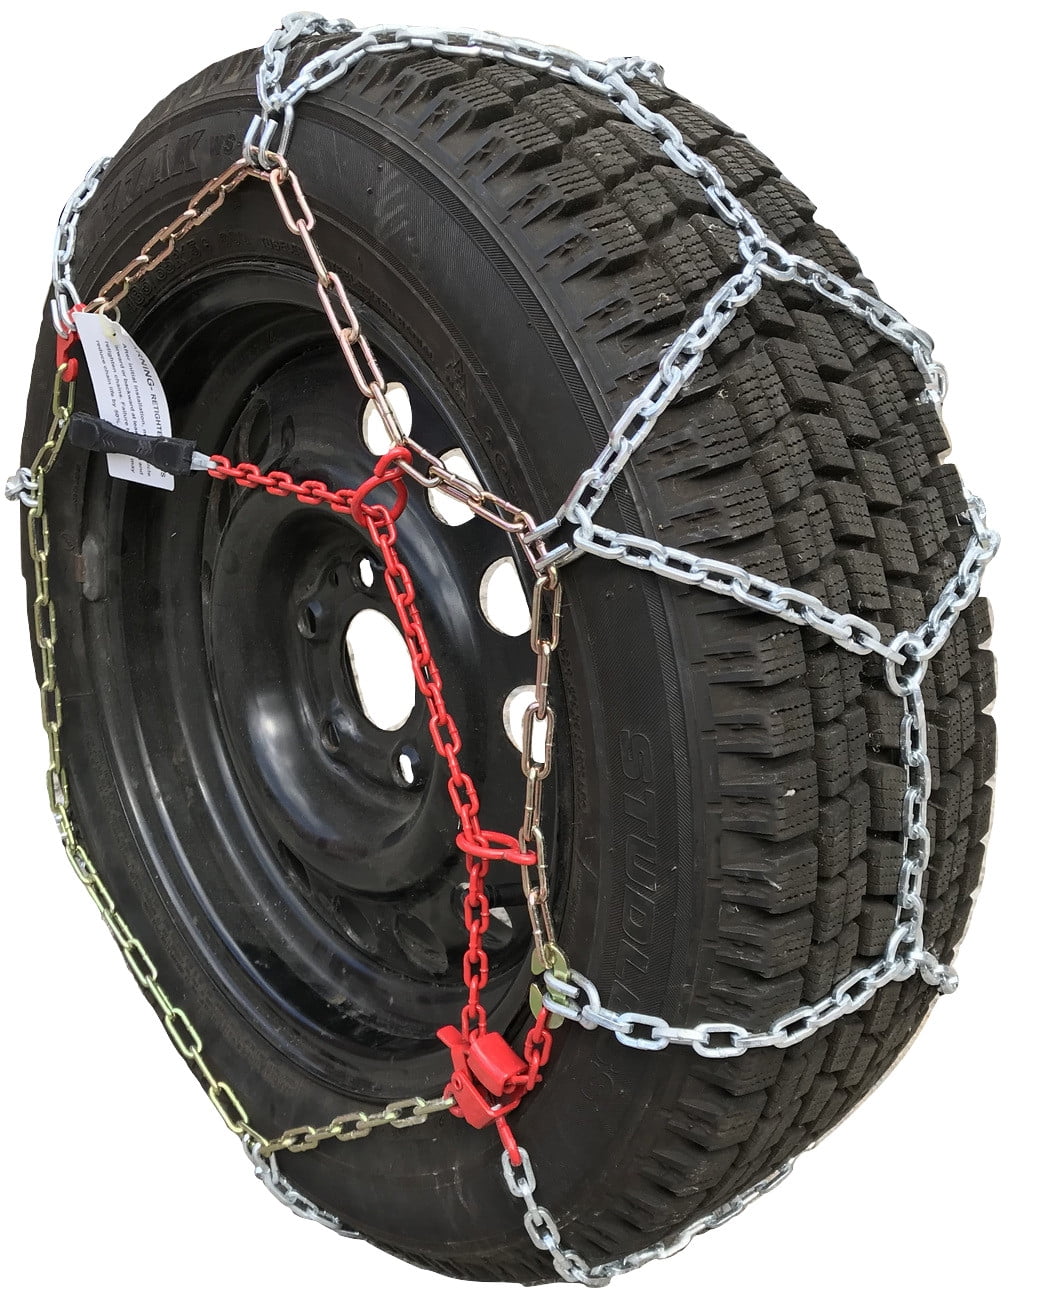 Grizzlar GTU-407 Garden Tractor 4 Link Ladder Alloy Tire Chains Tensioner included 18x8.50-10 18x8.50-8 18x8x12.125 18x9.50-8 9x9.50-8 